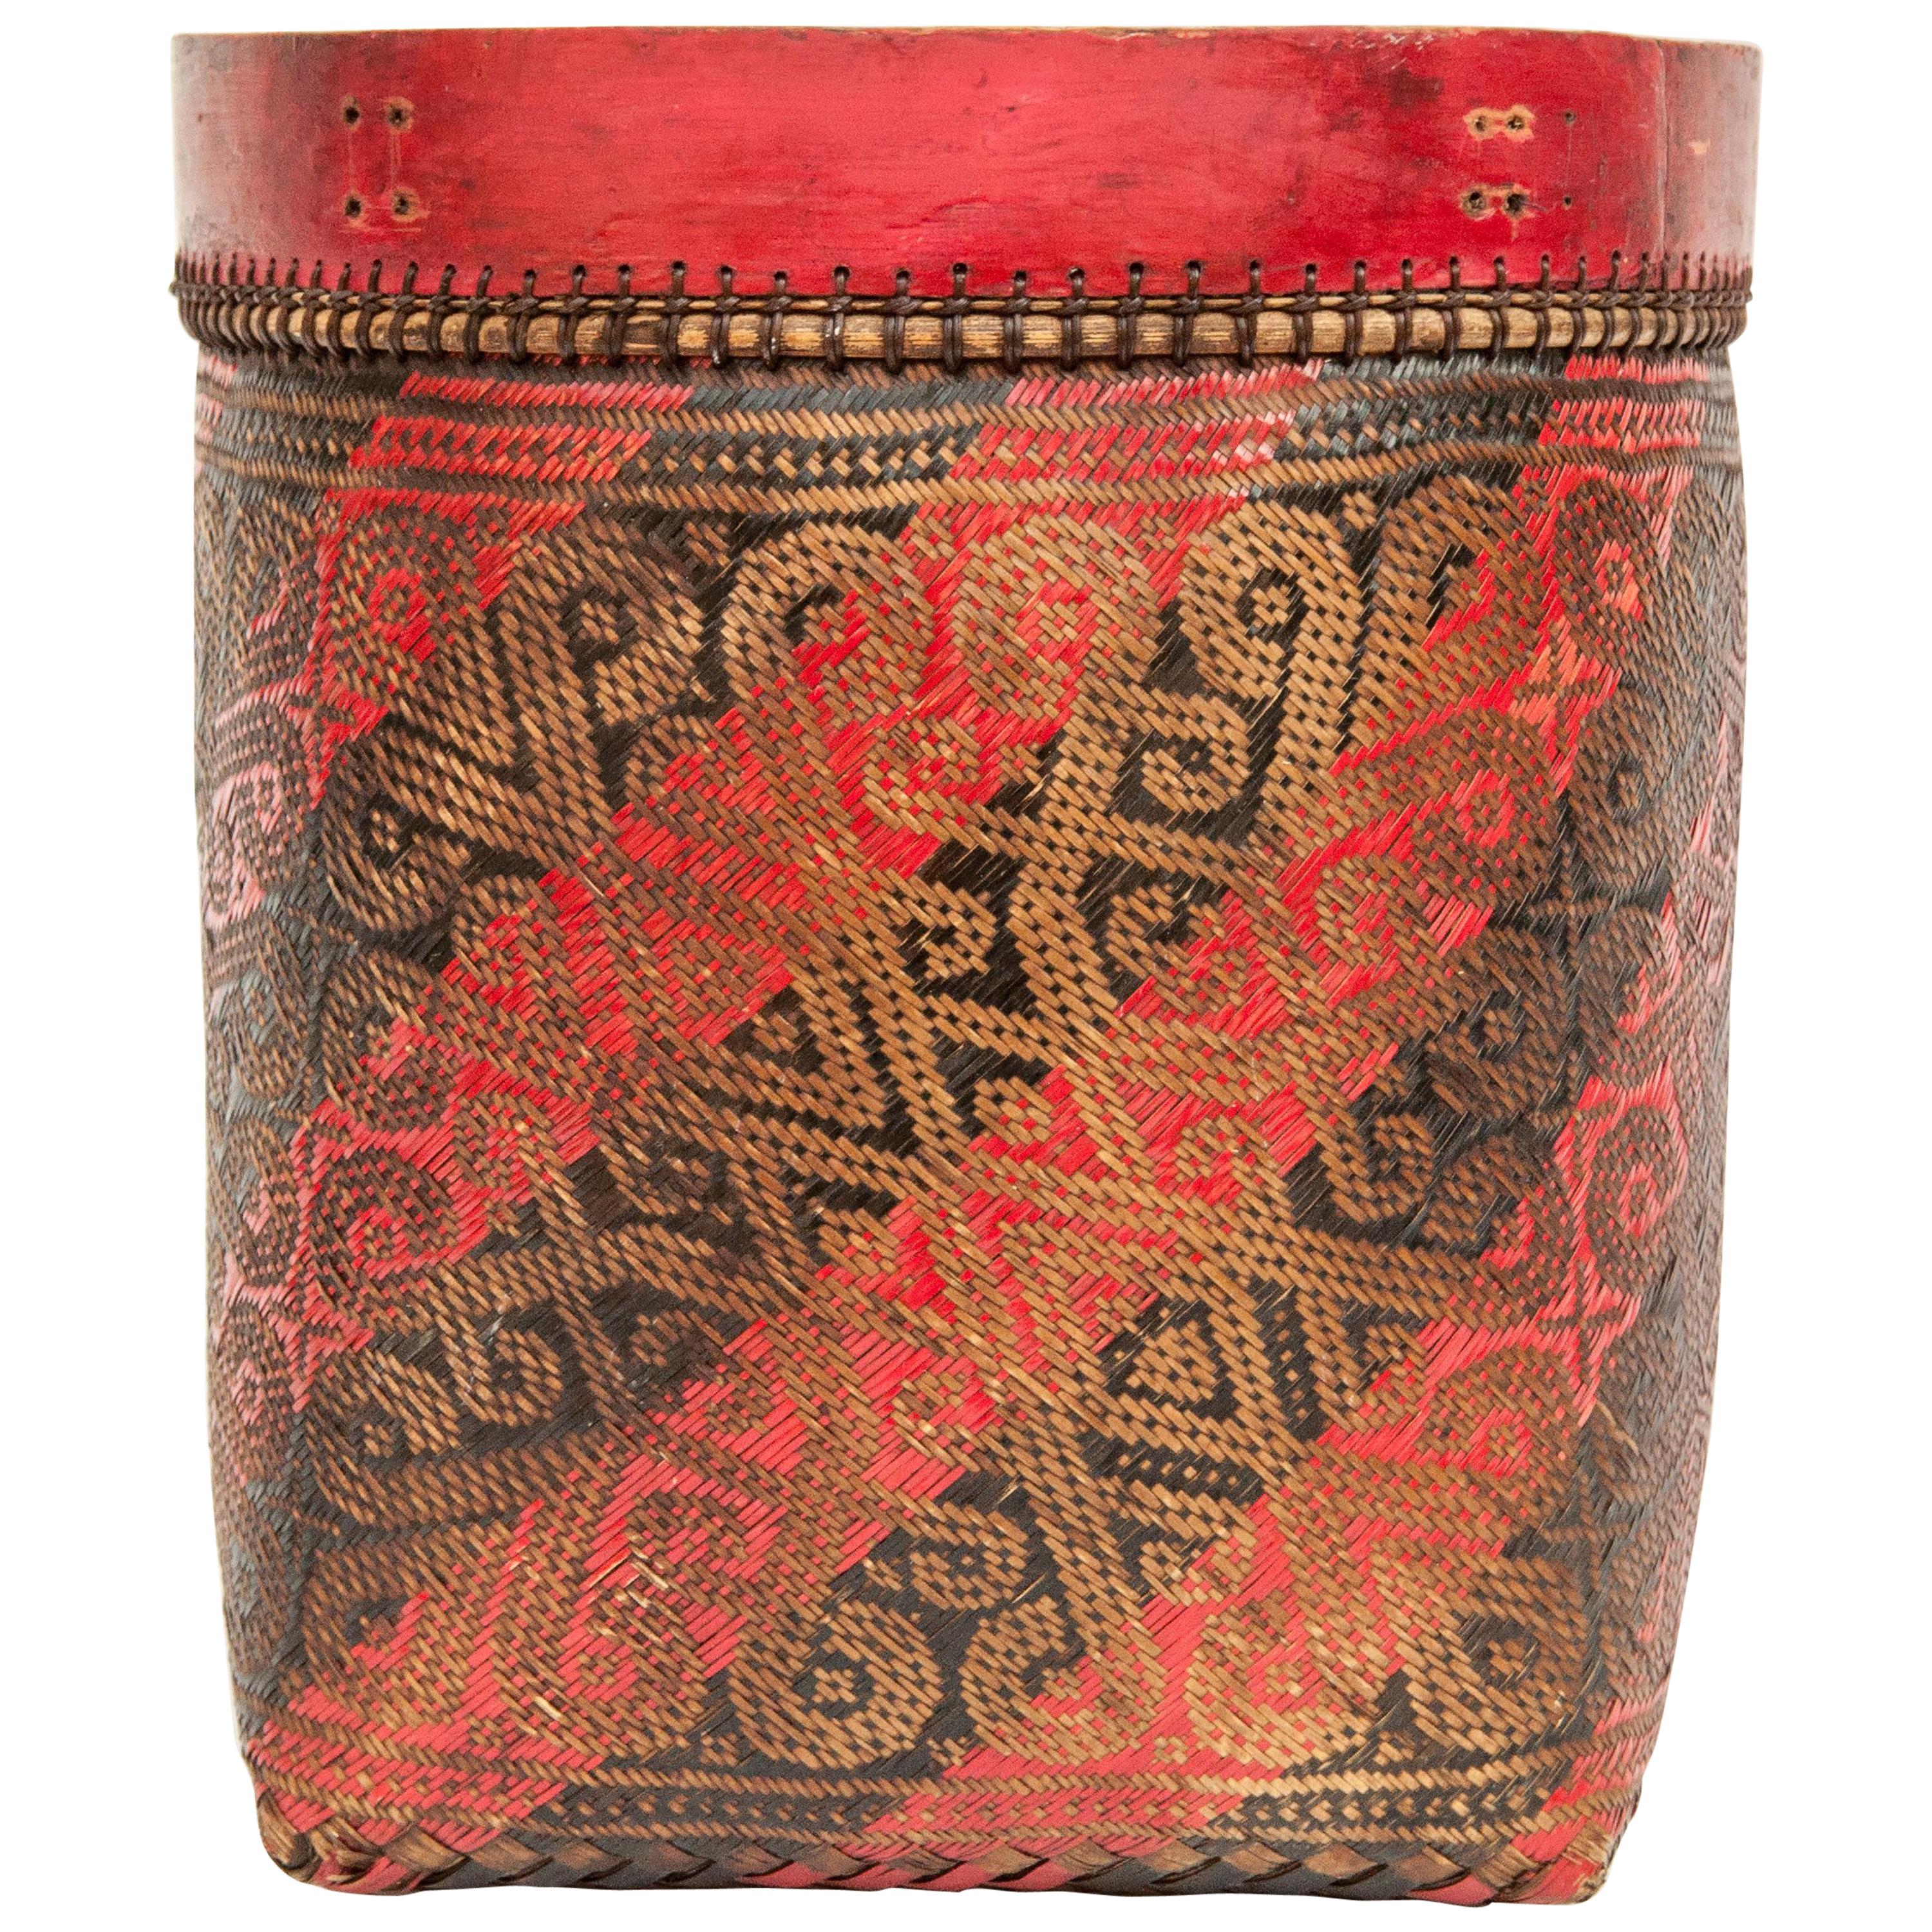 Vintage Seed Basket, with Woven Design, Iban of Borneo, Mid-Late 20th Century